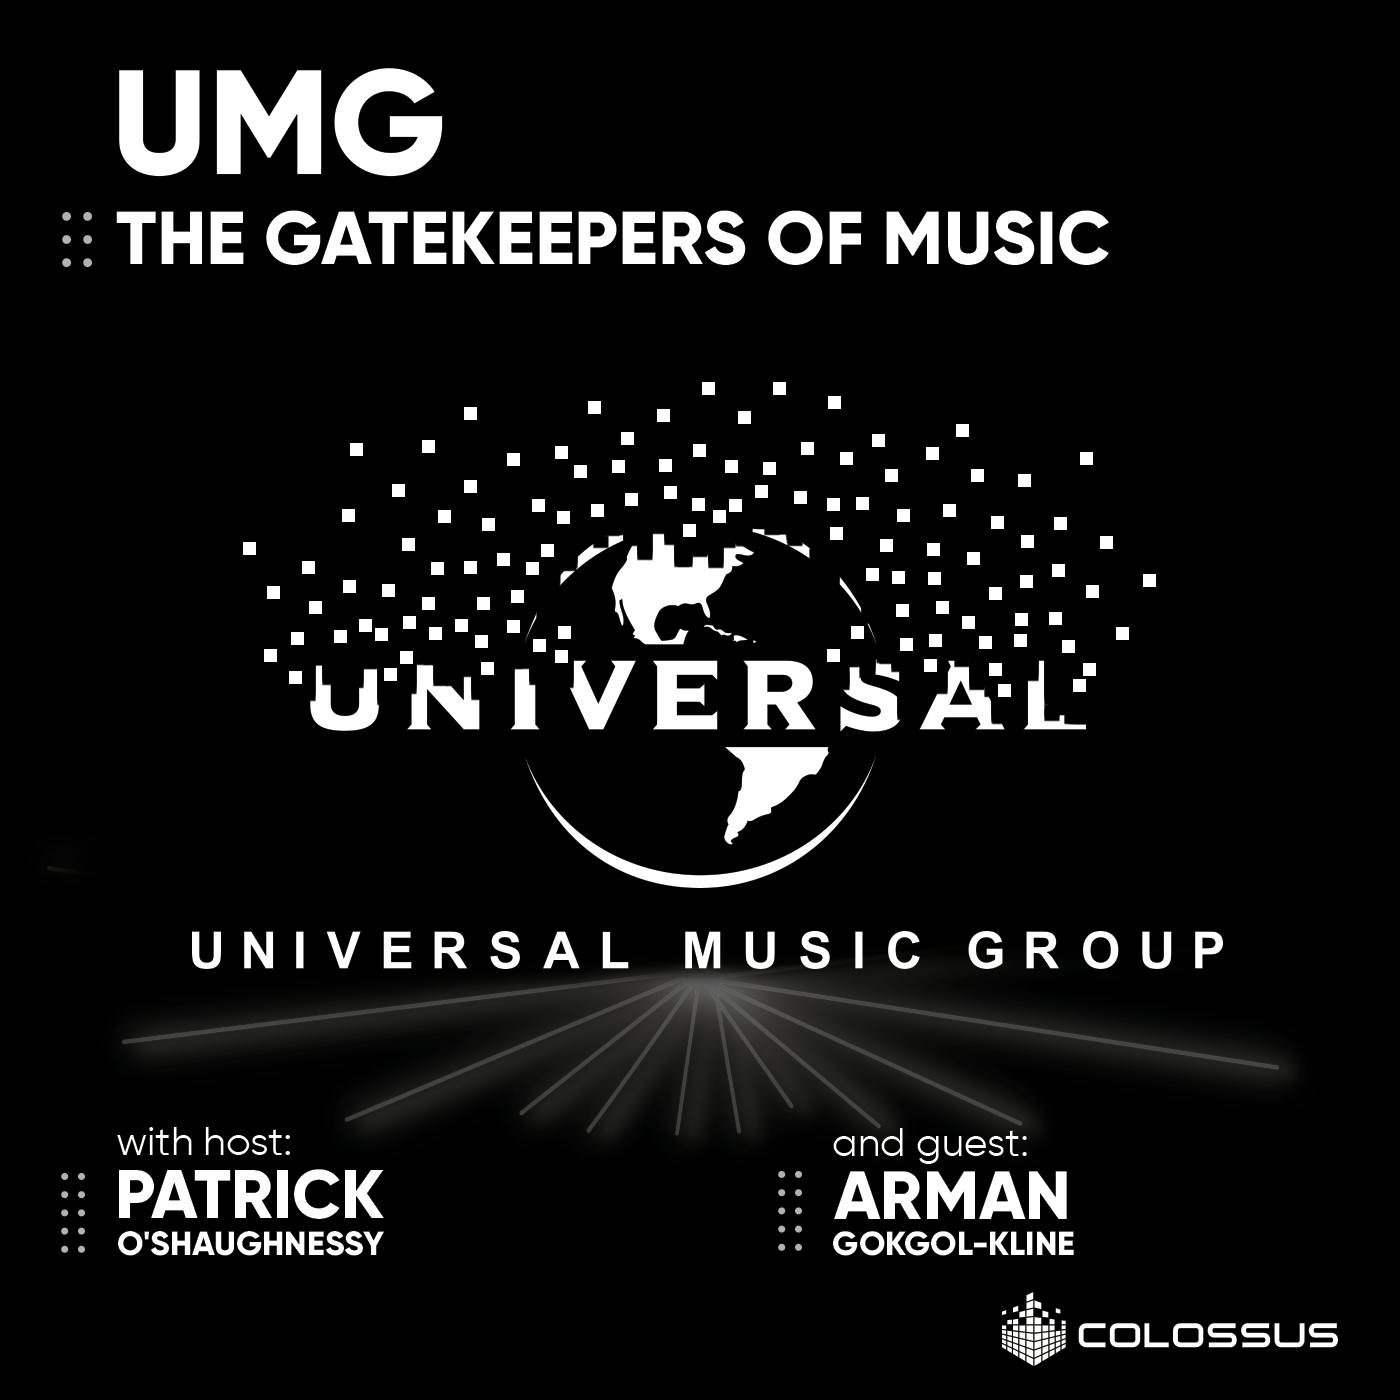 Universal Music Group: The Gatekeepers of Music - [Business Breakdowns, EP. 32]